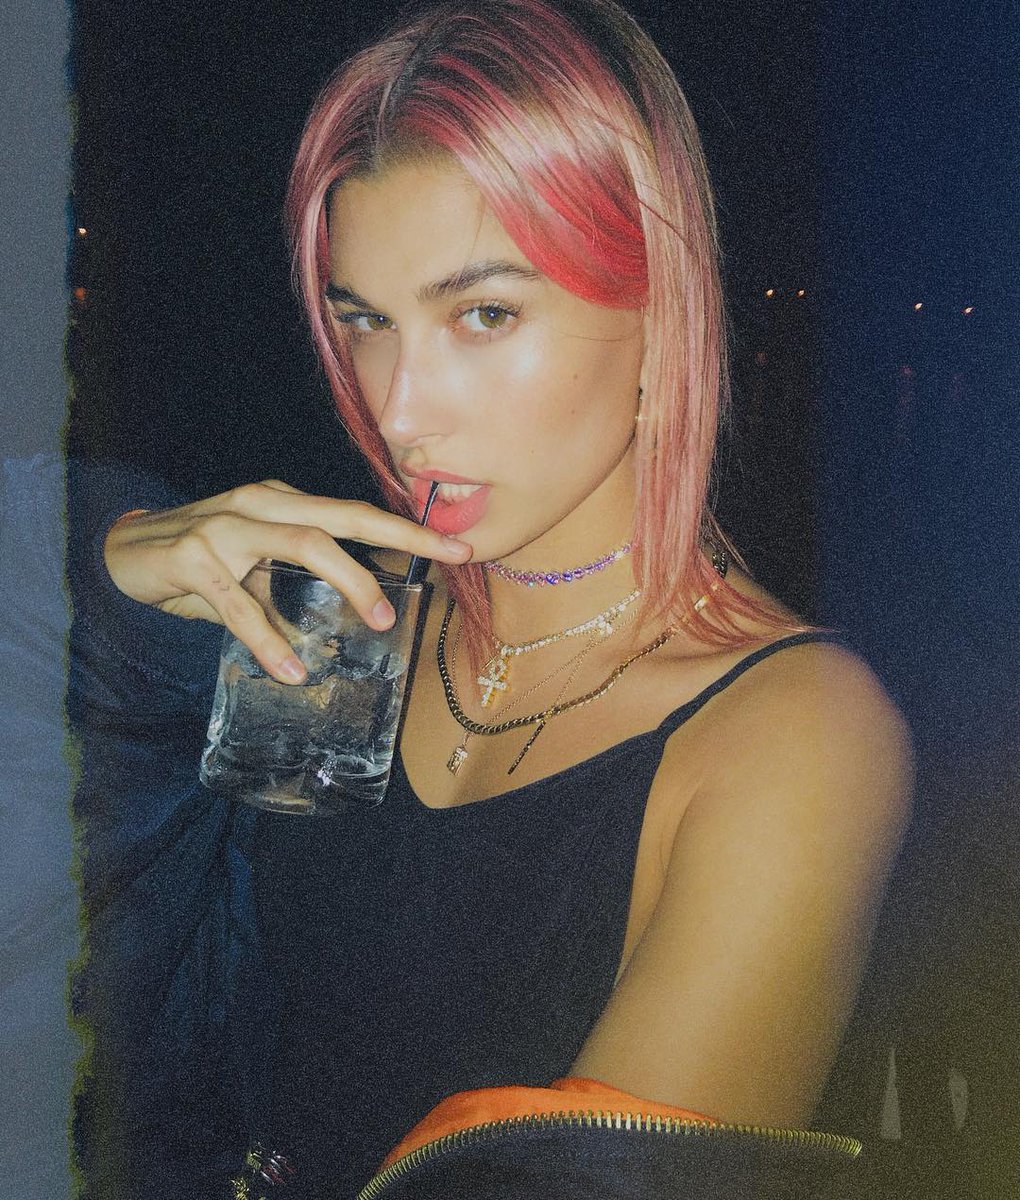 End of thread but also Hailey if you ever see this bring the pink back sometimes